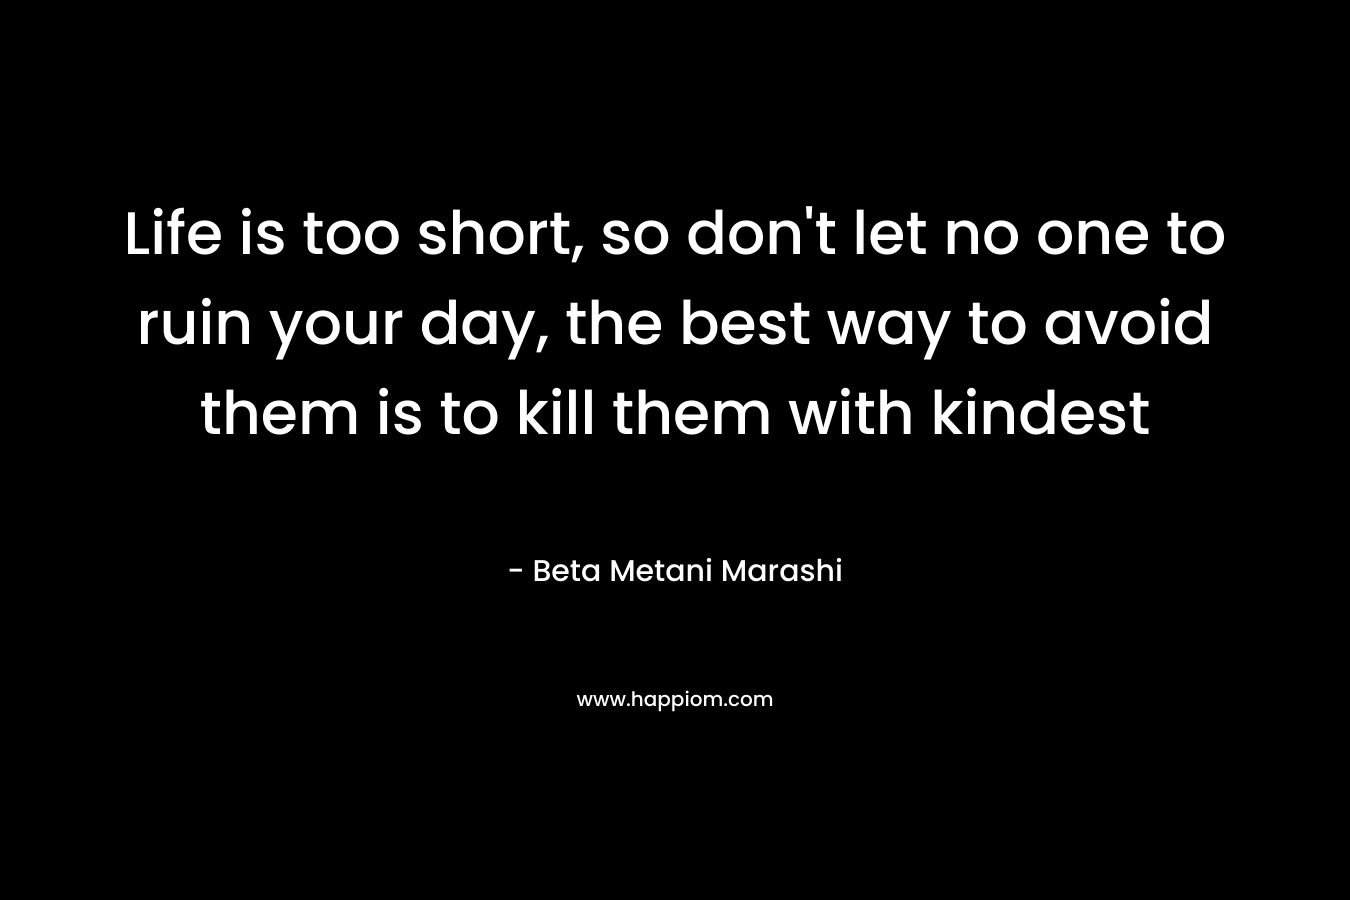 Life is too short, so don’t let no one to ruin your day, the best way to avoid them is to kill them with kindest – Beta Metani Marashi